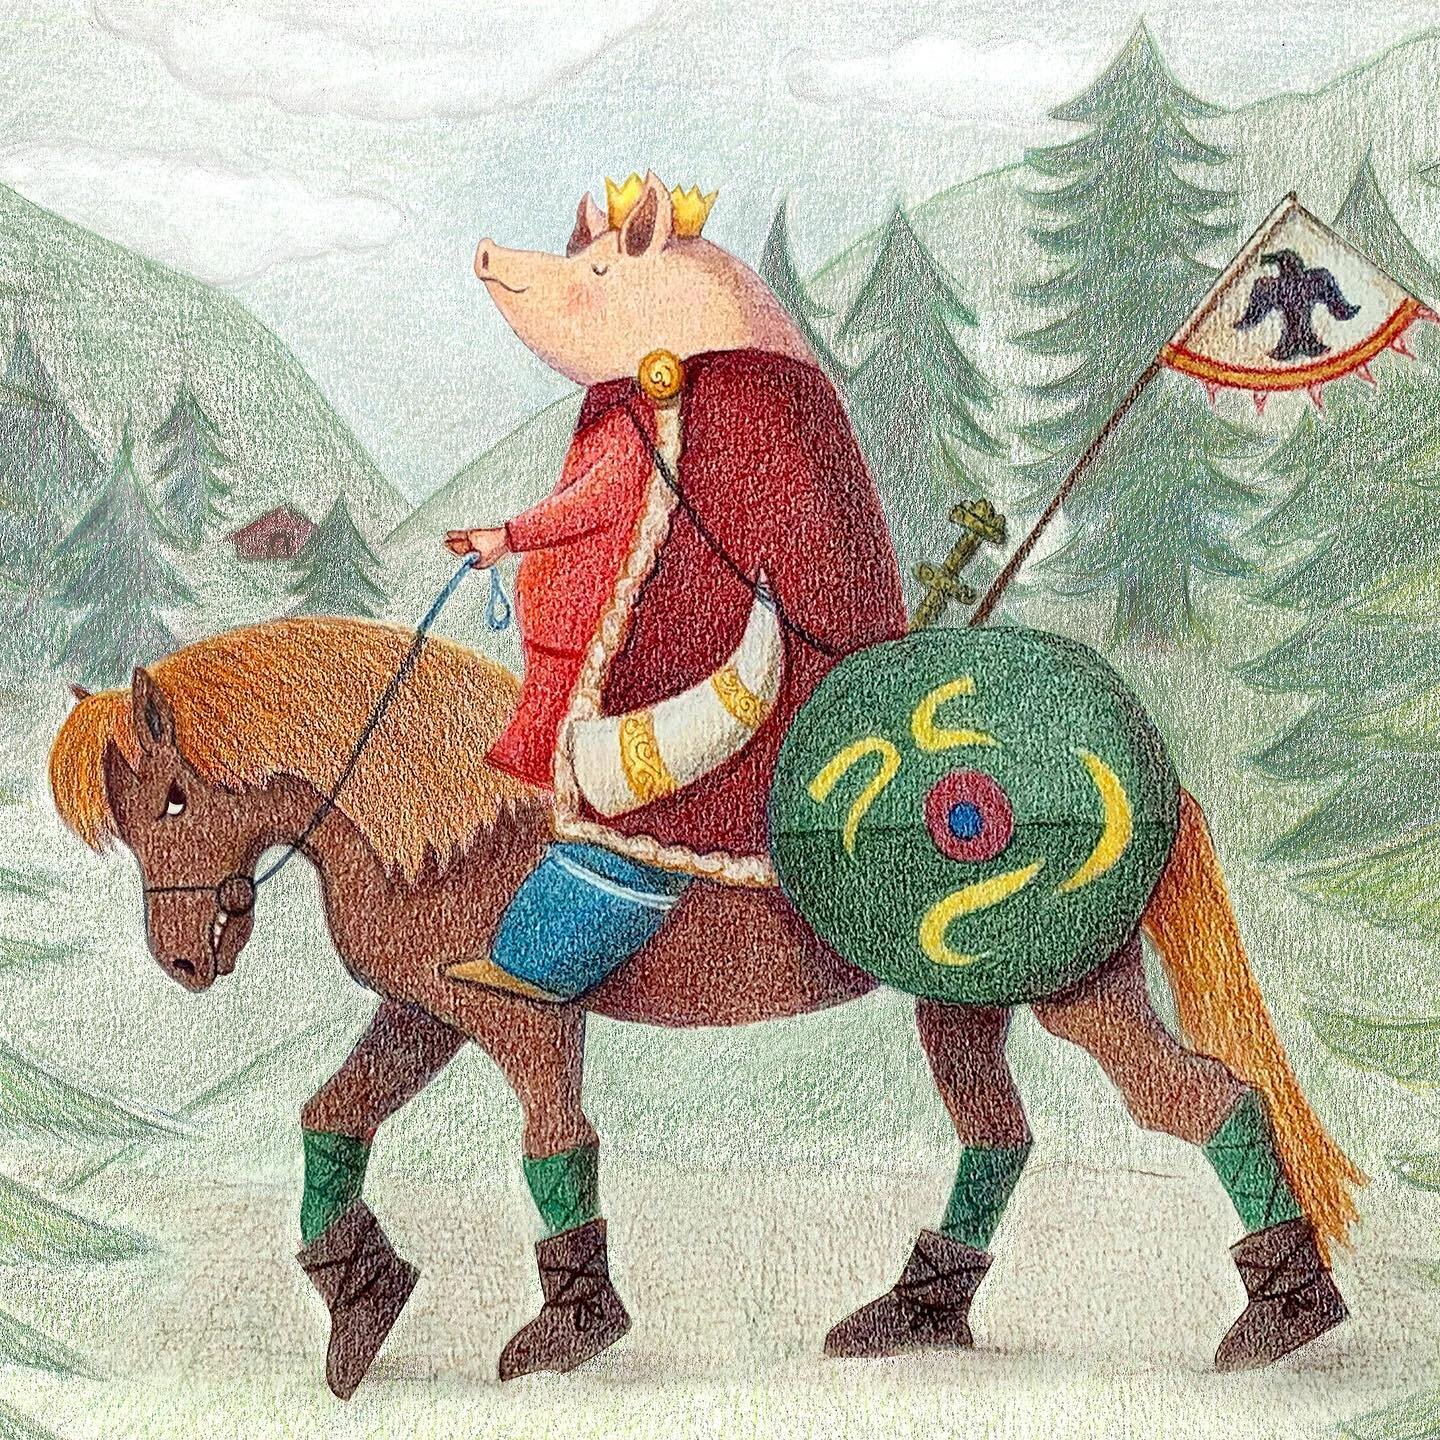 Say hi to Prince Charming and his horse. They&rsquo;re on their way to the seven dwarfs&rsquo;  house to see sleeping Snow White.  #weirdcombination 
.
.
.
#childrenillustration #childrenbookillustration #kidlitart #kidlit #kidsillustration #pictureb